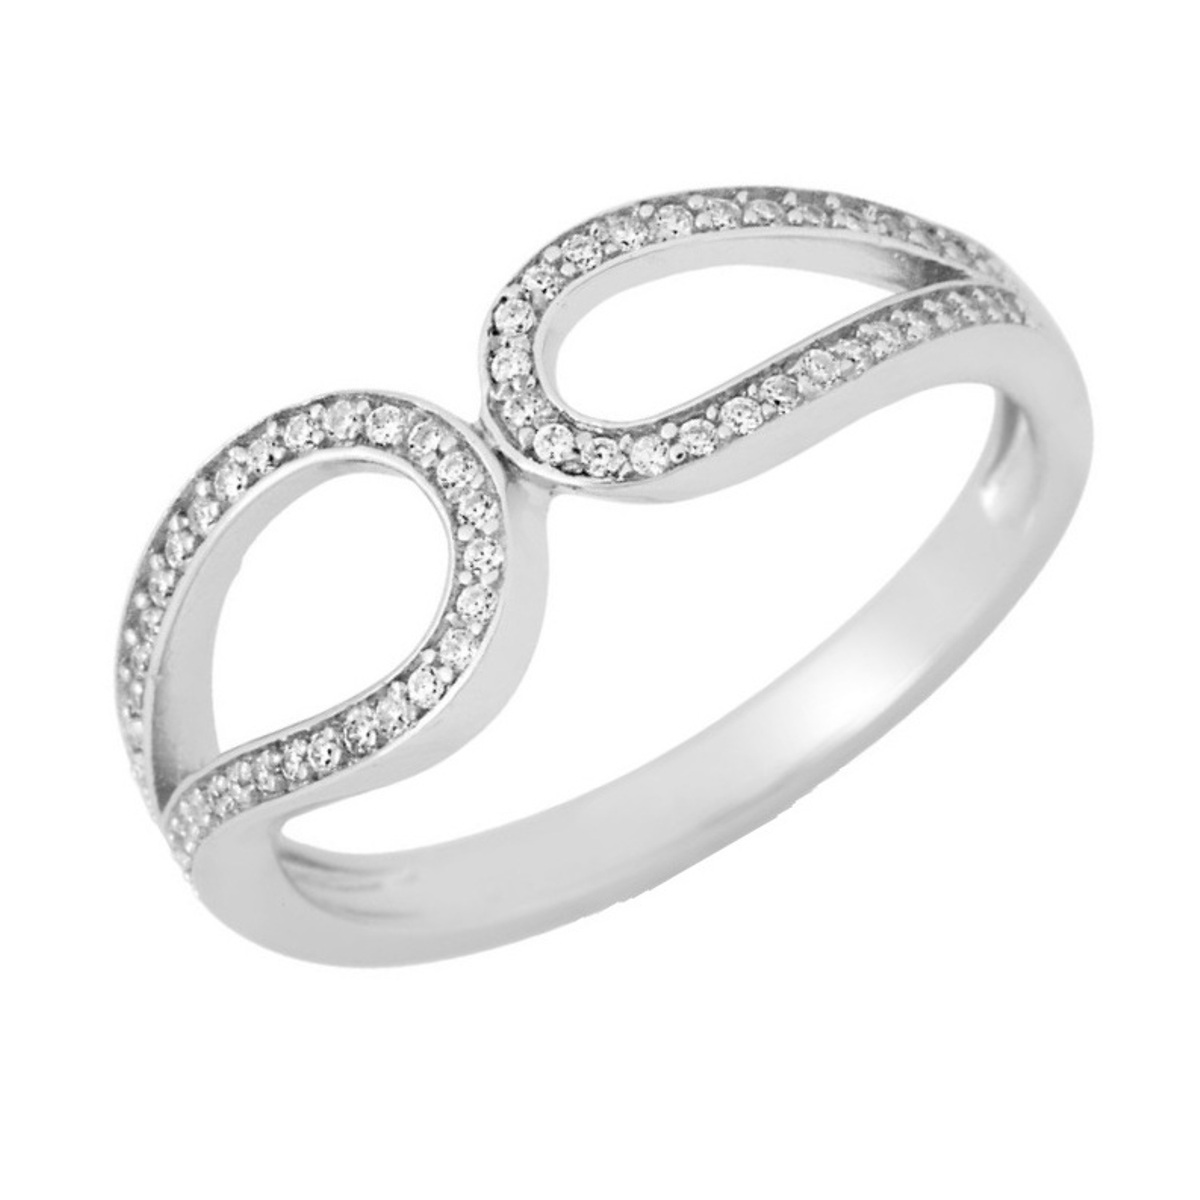 CCut-Out Design Cubic Zirconia  Ring, Rhodium Plated Sterling Silver